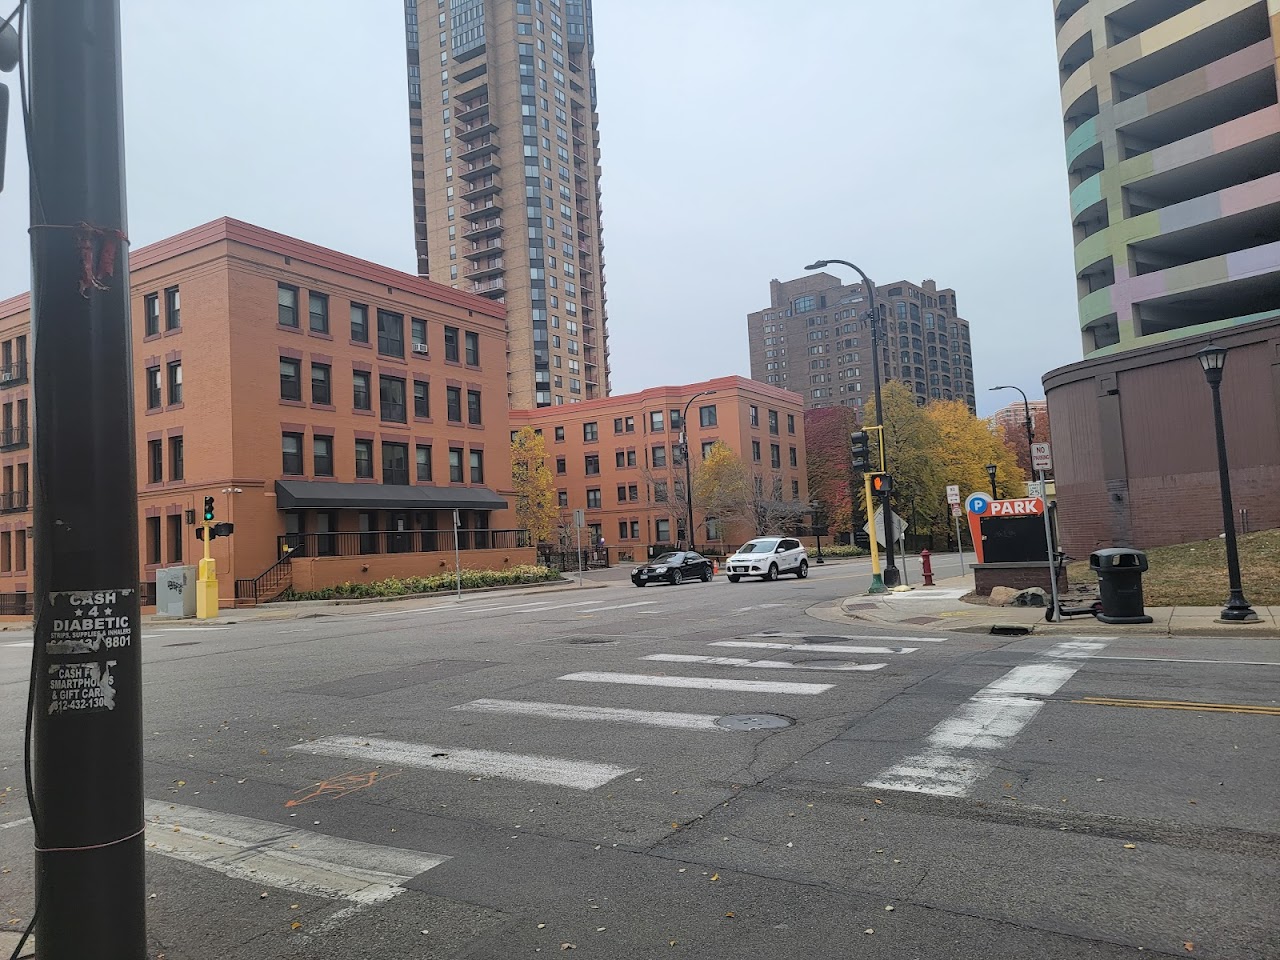 Photo of NICOLLET TOWERS. Affordable housing located at 1350 NICOLLETT MALL MINNEAPOLIS, MN 55403